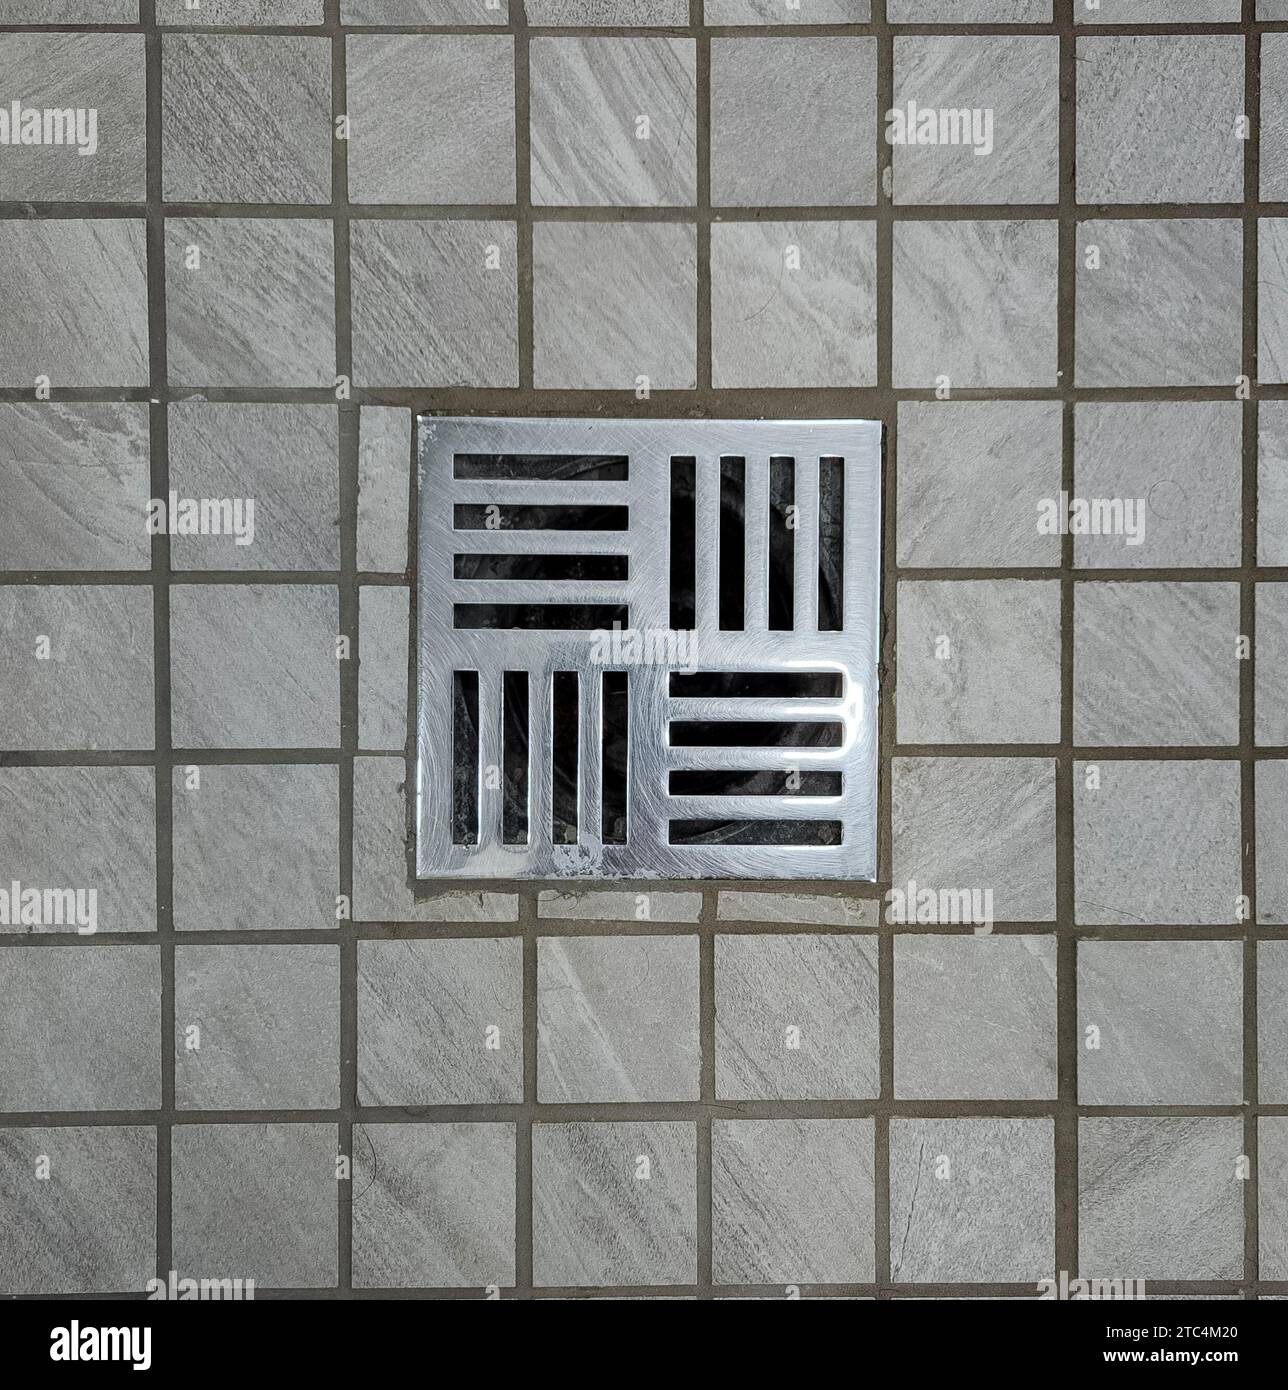 Shower stall floor drain stainless steel with tiled ground Stock Photo